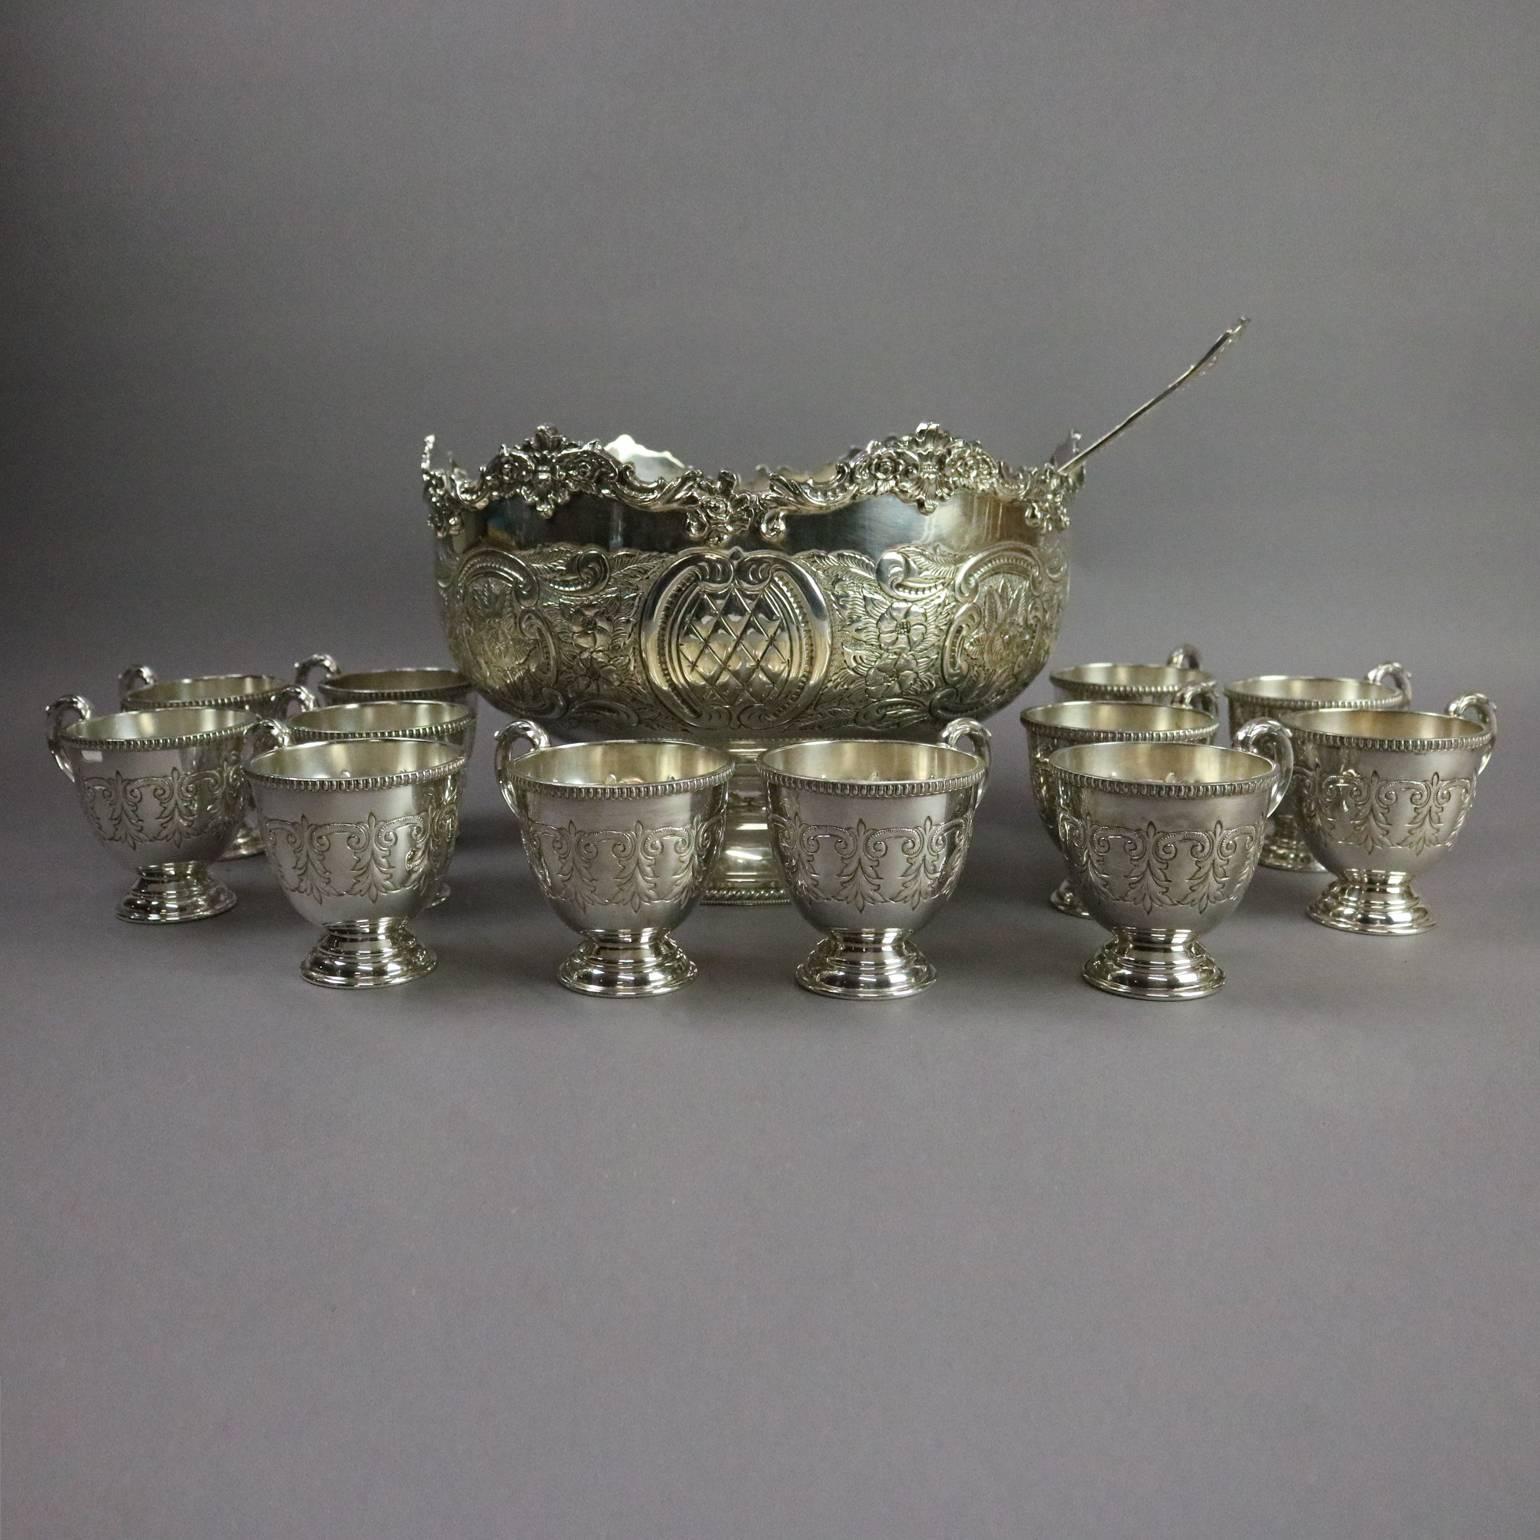 Vintage English silver plate punch bowl with twelve handled cups by Sheffield feature embossed scroll, floral and foliate design; ladle by Rogers, circa 1940

Measures: 8" H x 12" diameter bowl; 4" H x 4" diameter cups.